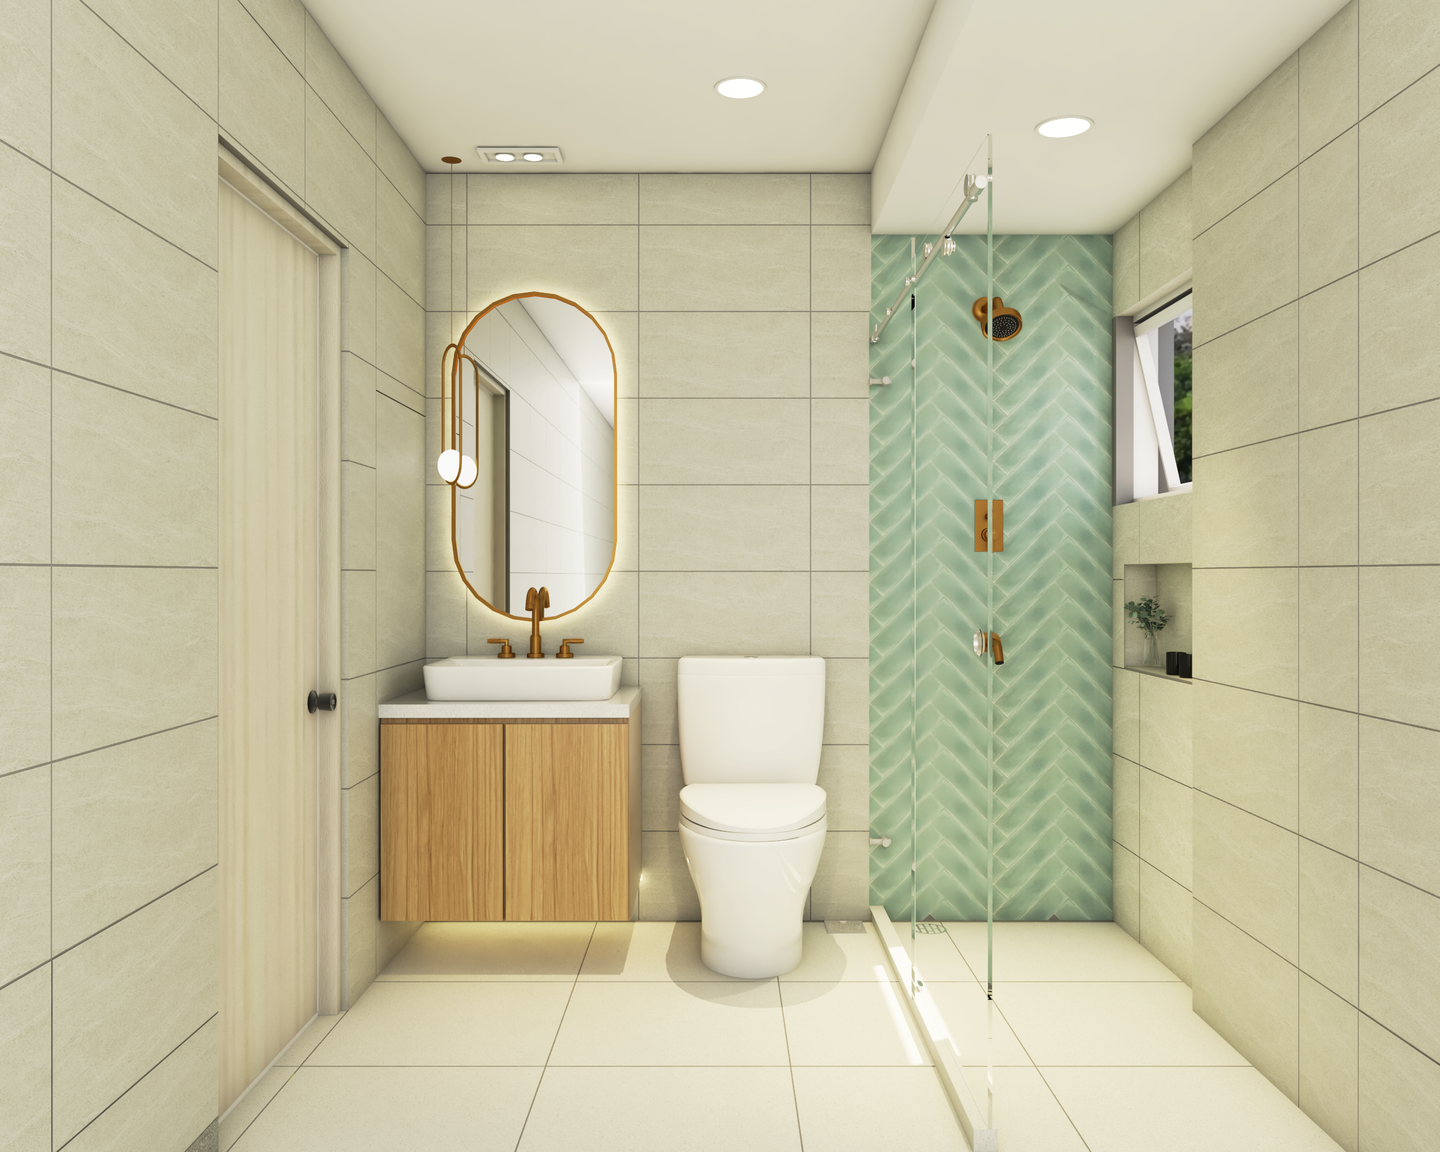 Spacious Modern Toilet With Mint Green Tiles - Livspace